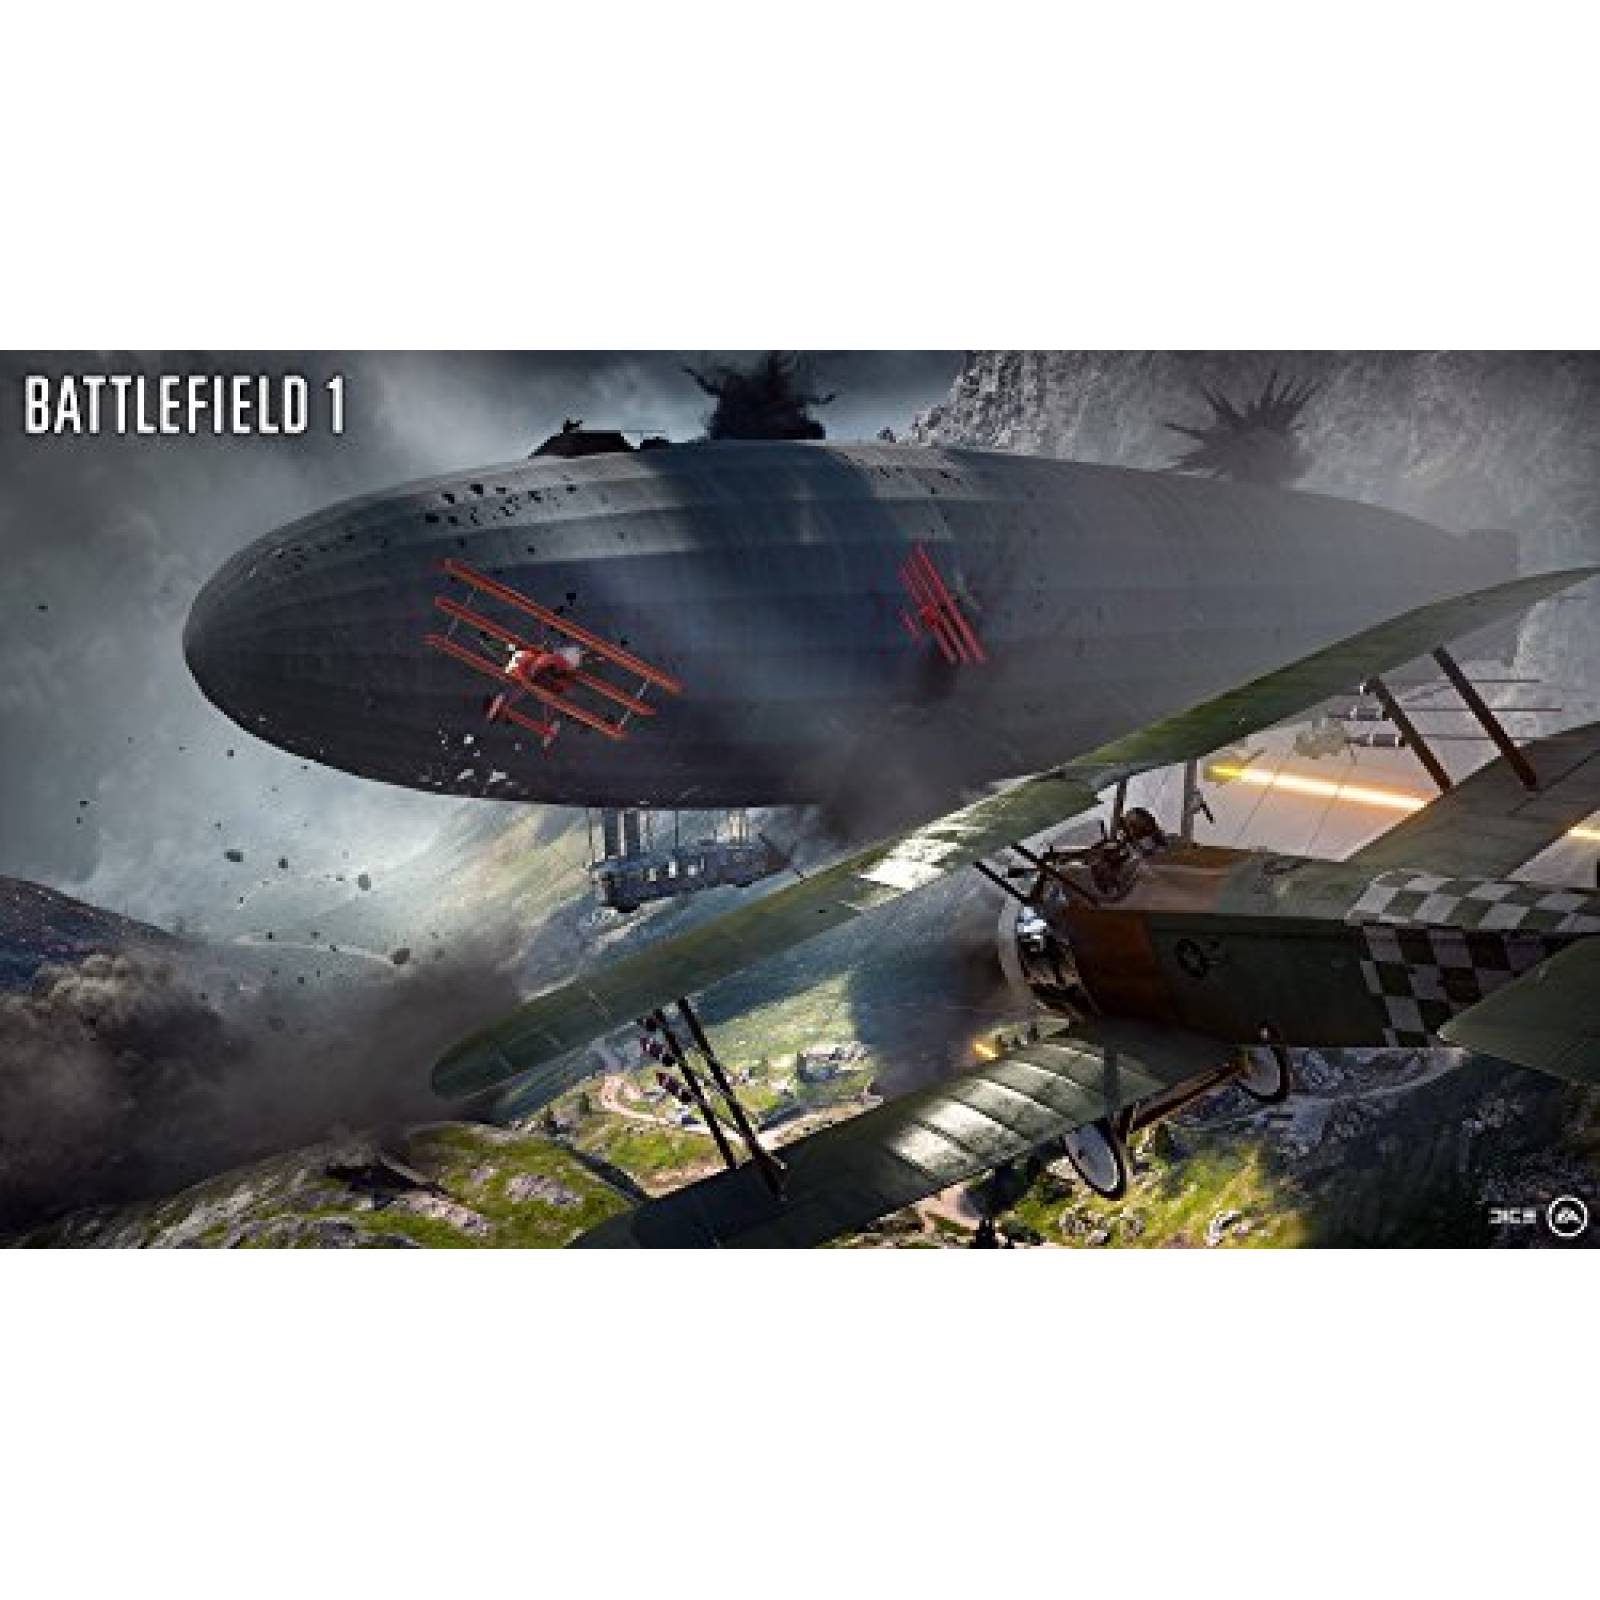 Jogo Battlefield 1 - Early Enlister Deluxe Edition - Ps4